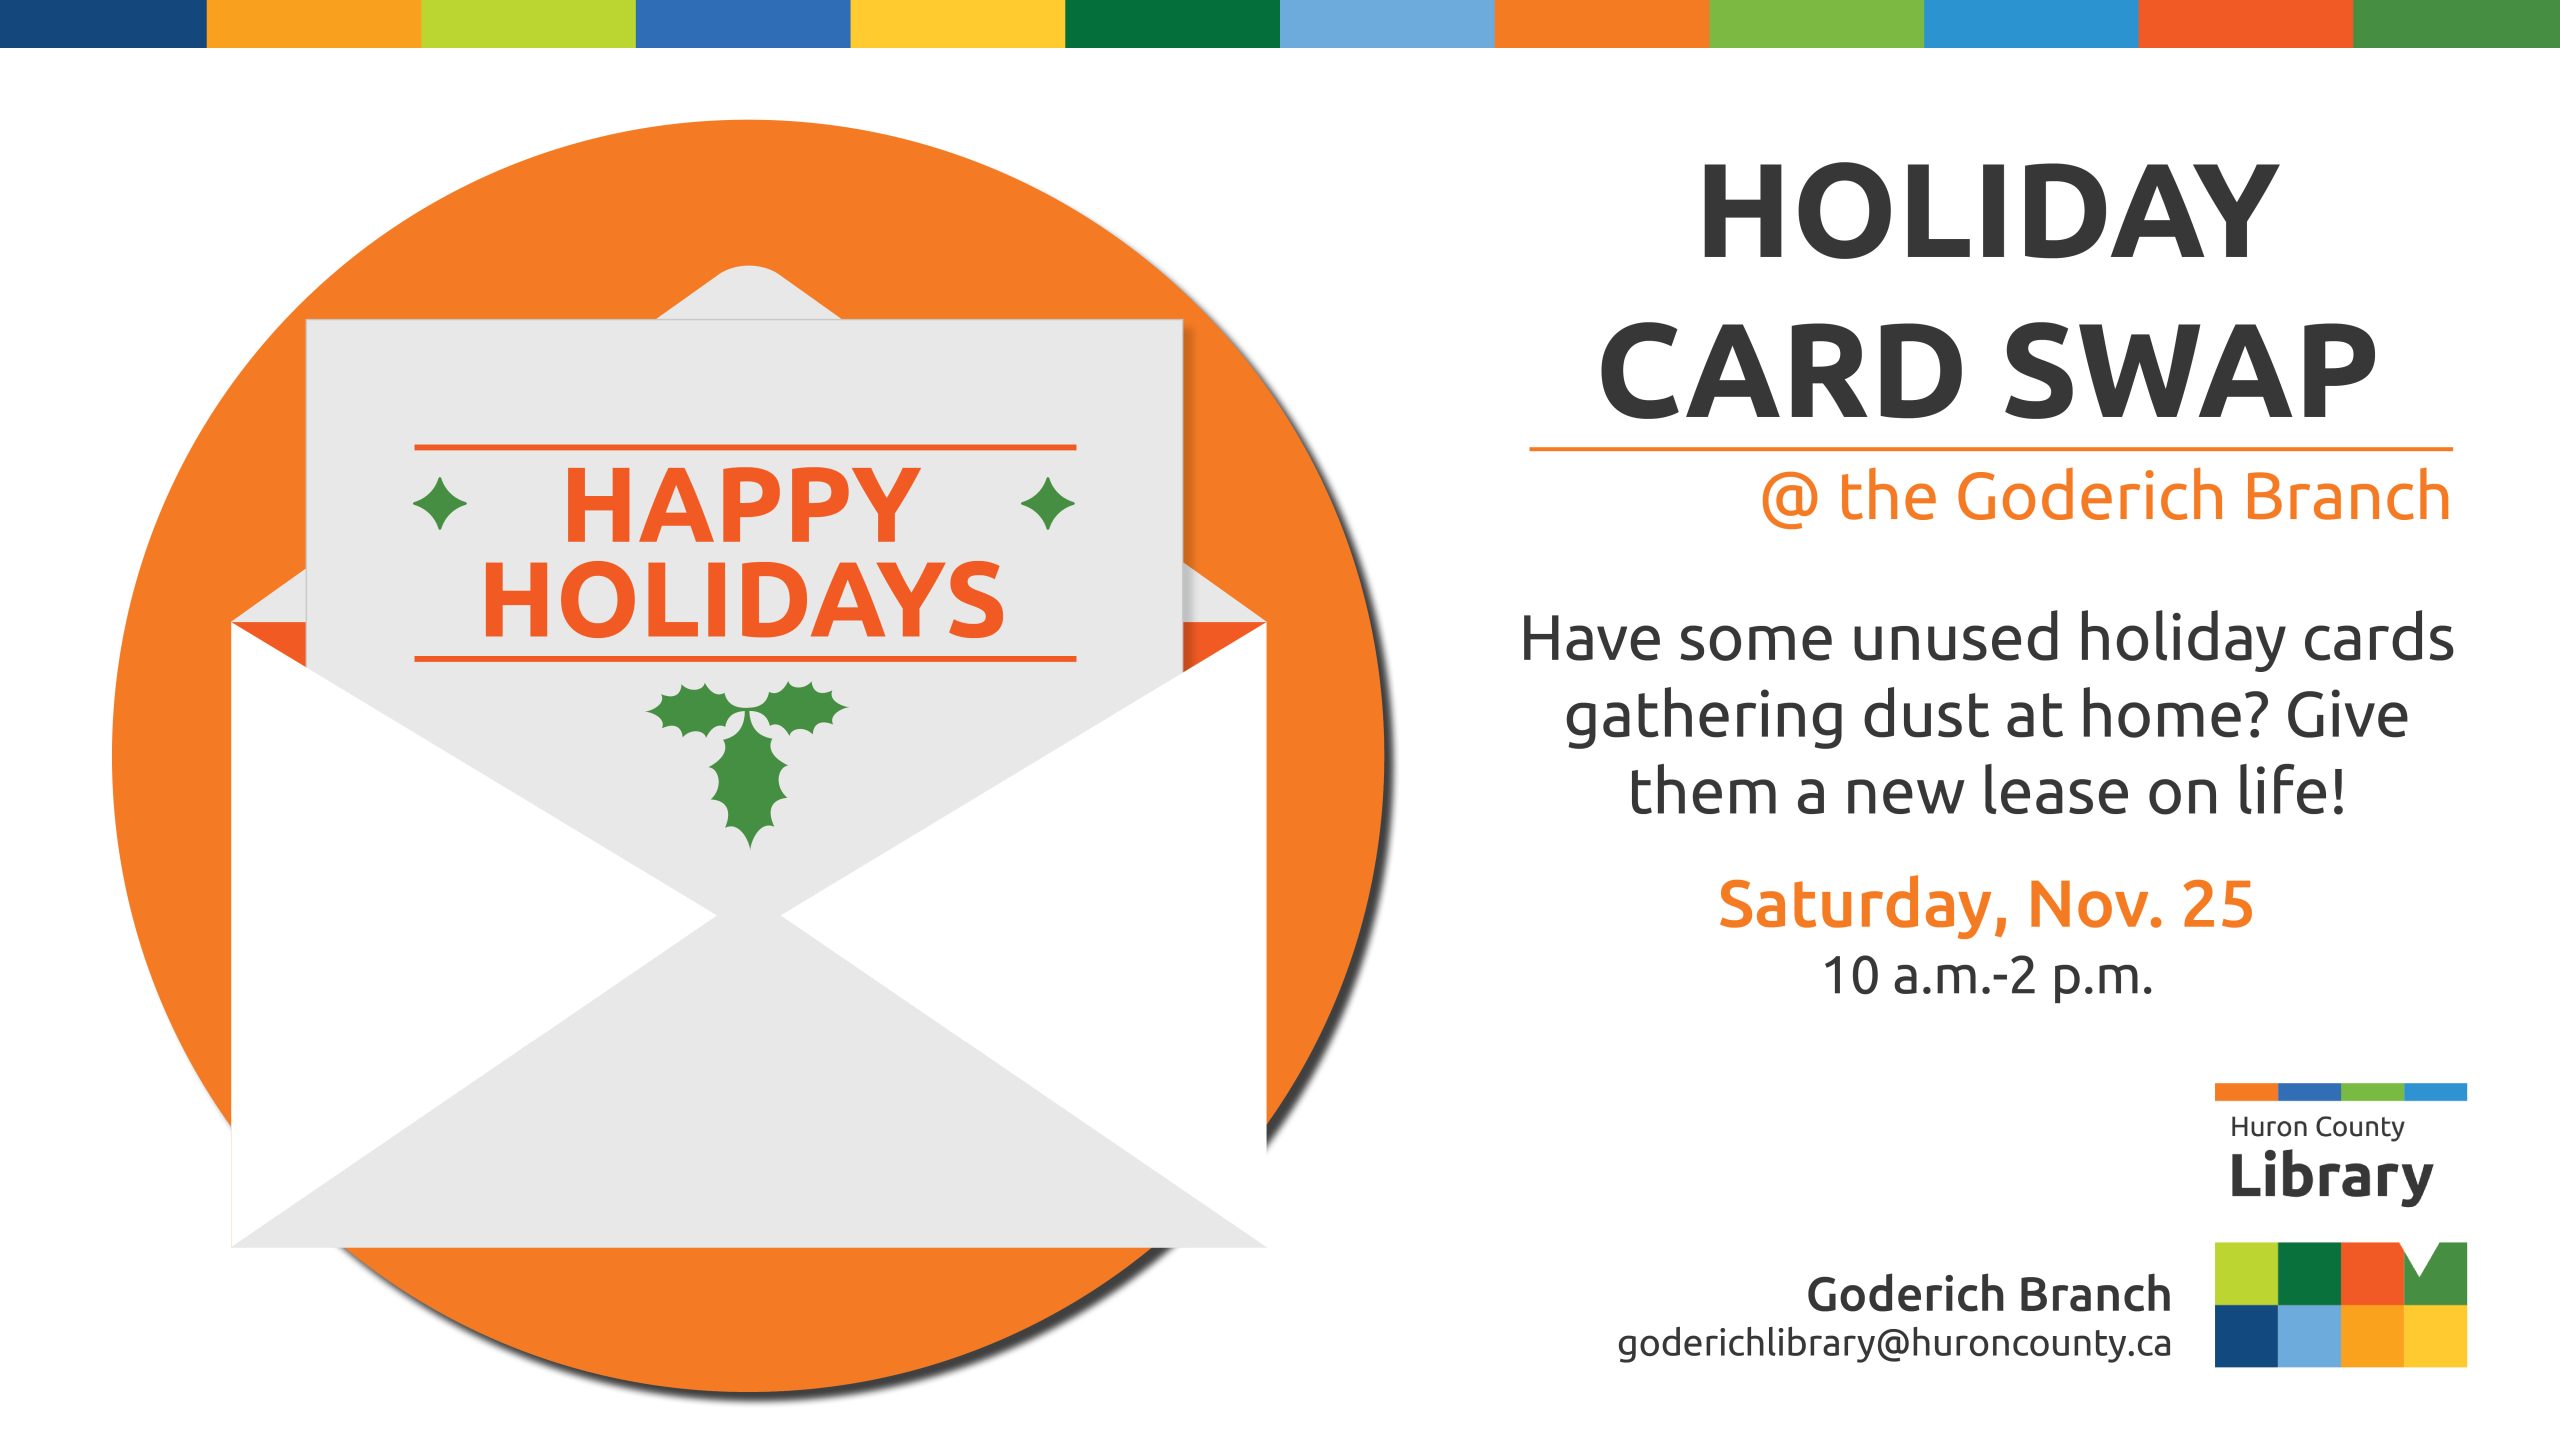 Illustration of a holiday card in an envelope with text promoting Holiday Card Swap at the Goderich Branch